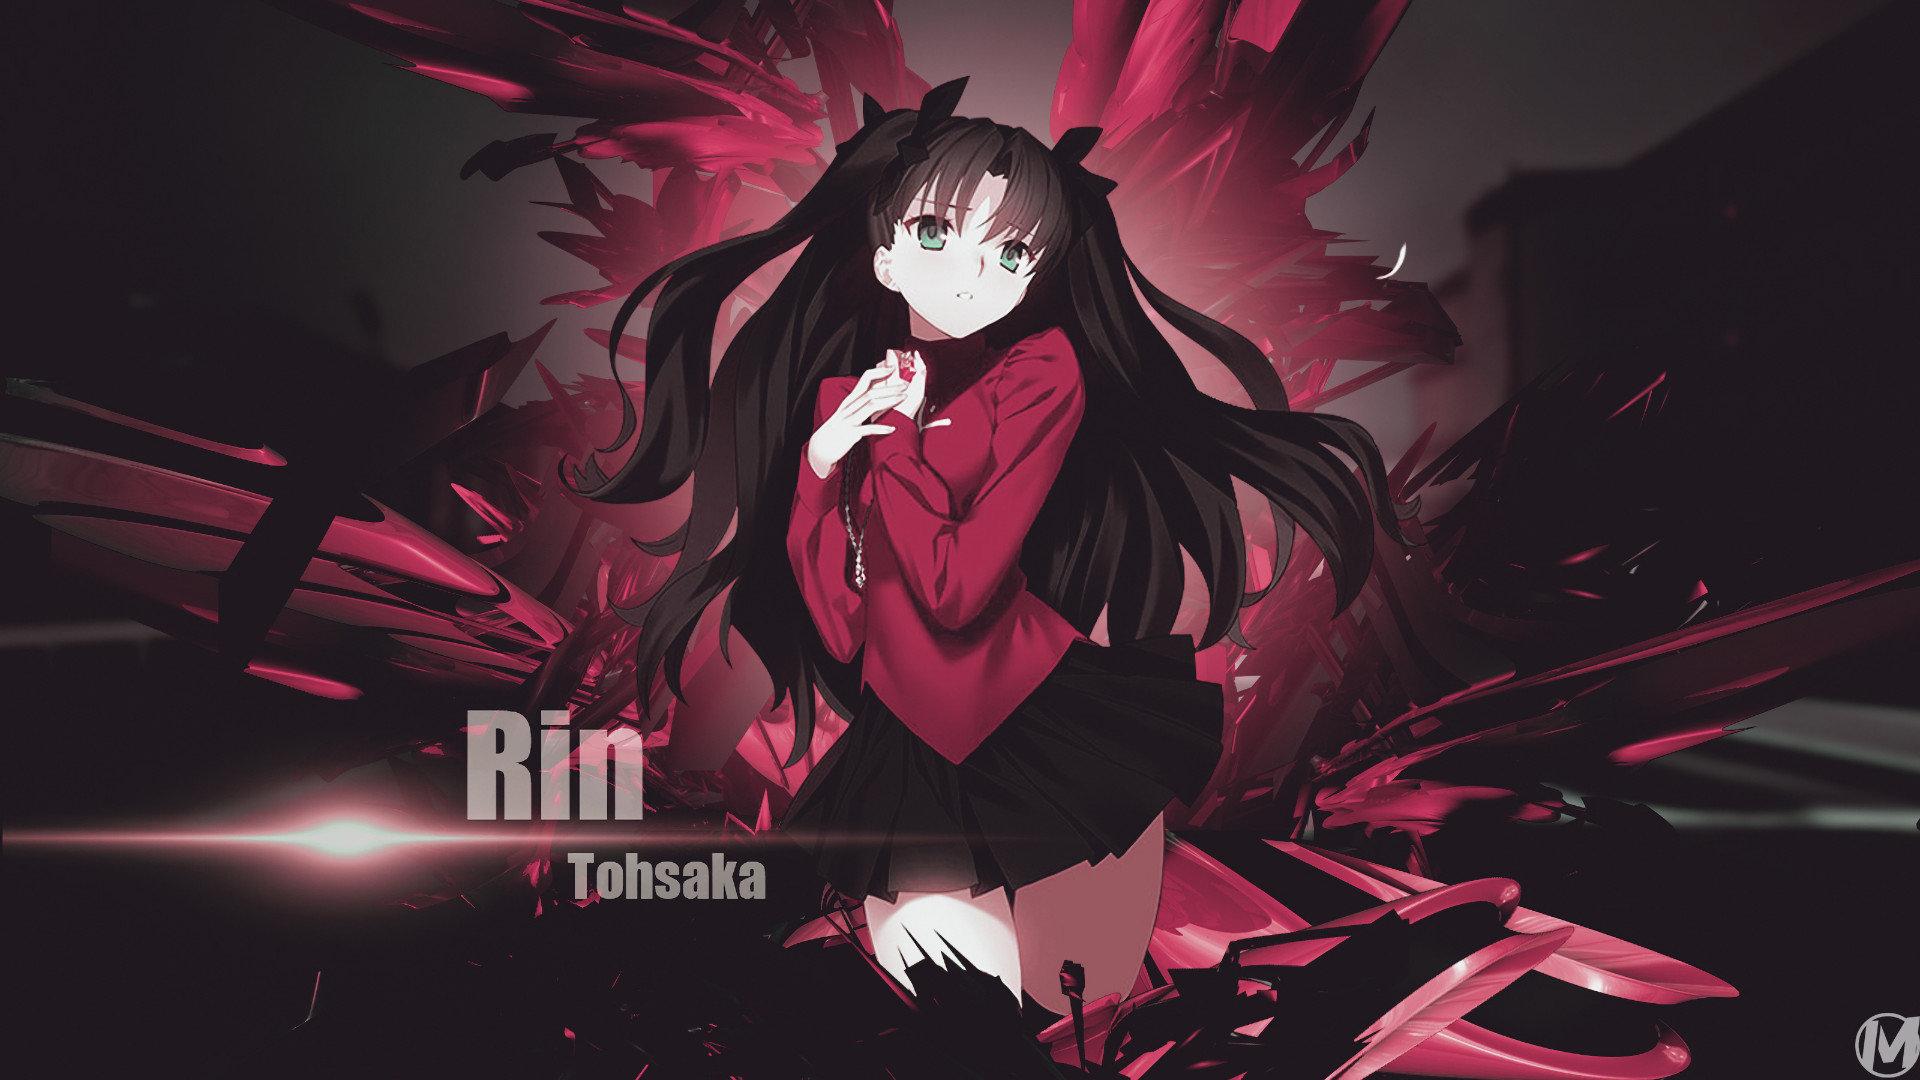 Rin Tohsaka Fate Stay Night Anime Mobile Wallpaper Rin  Background  Wallpapers